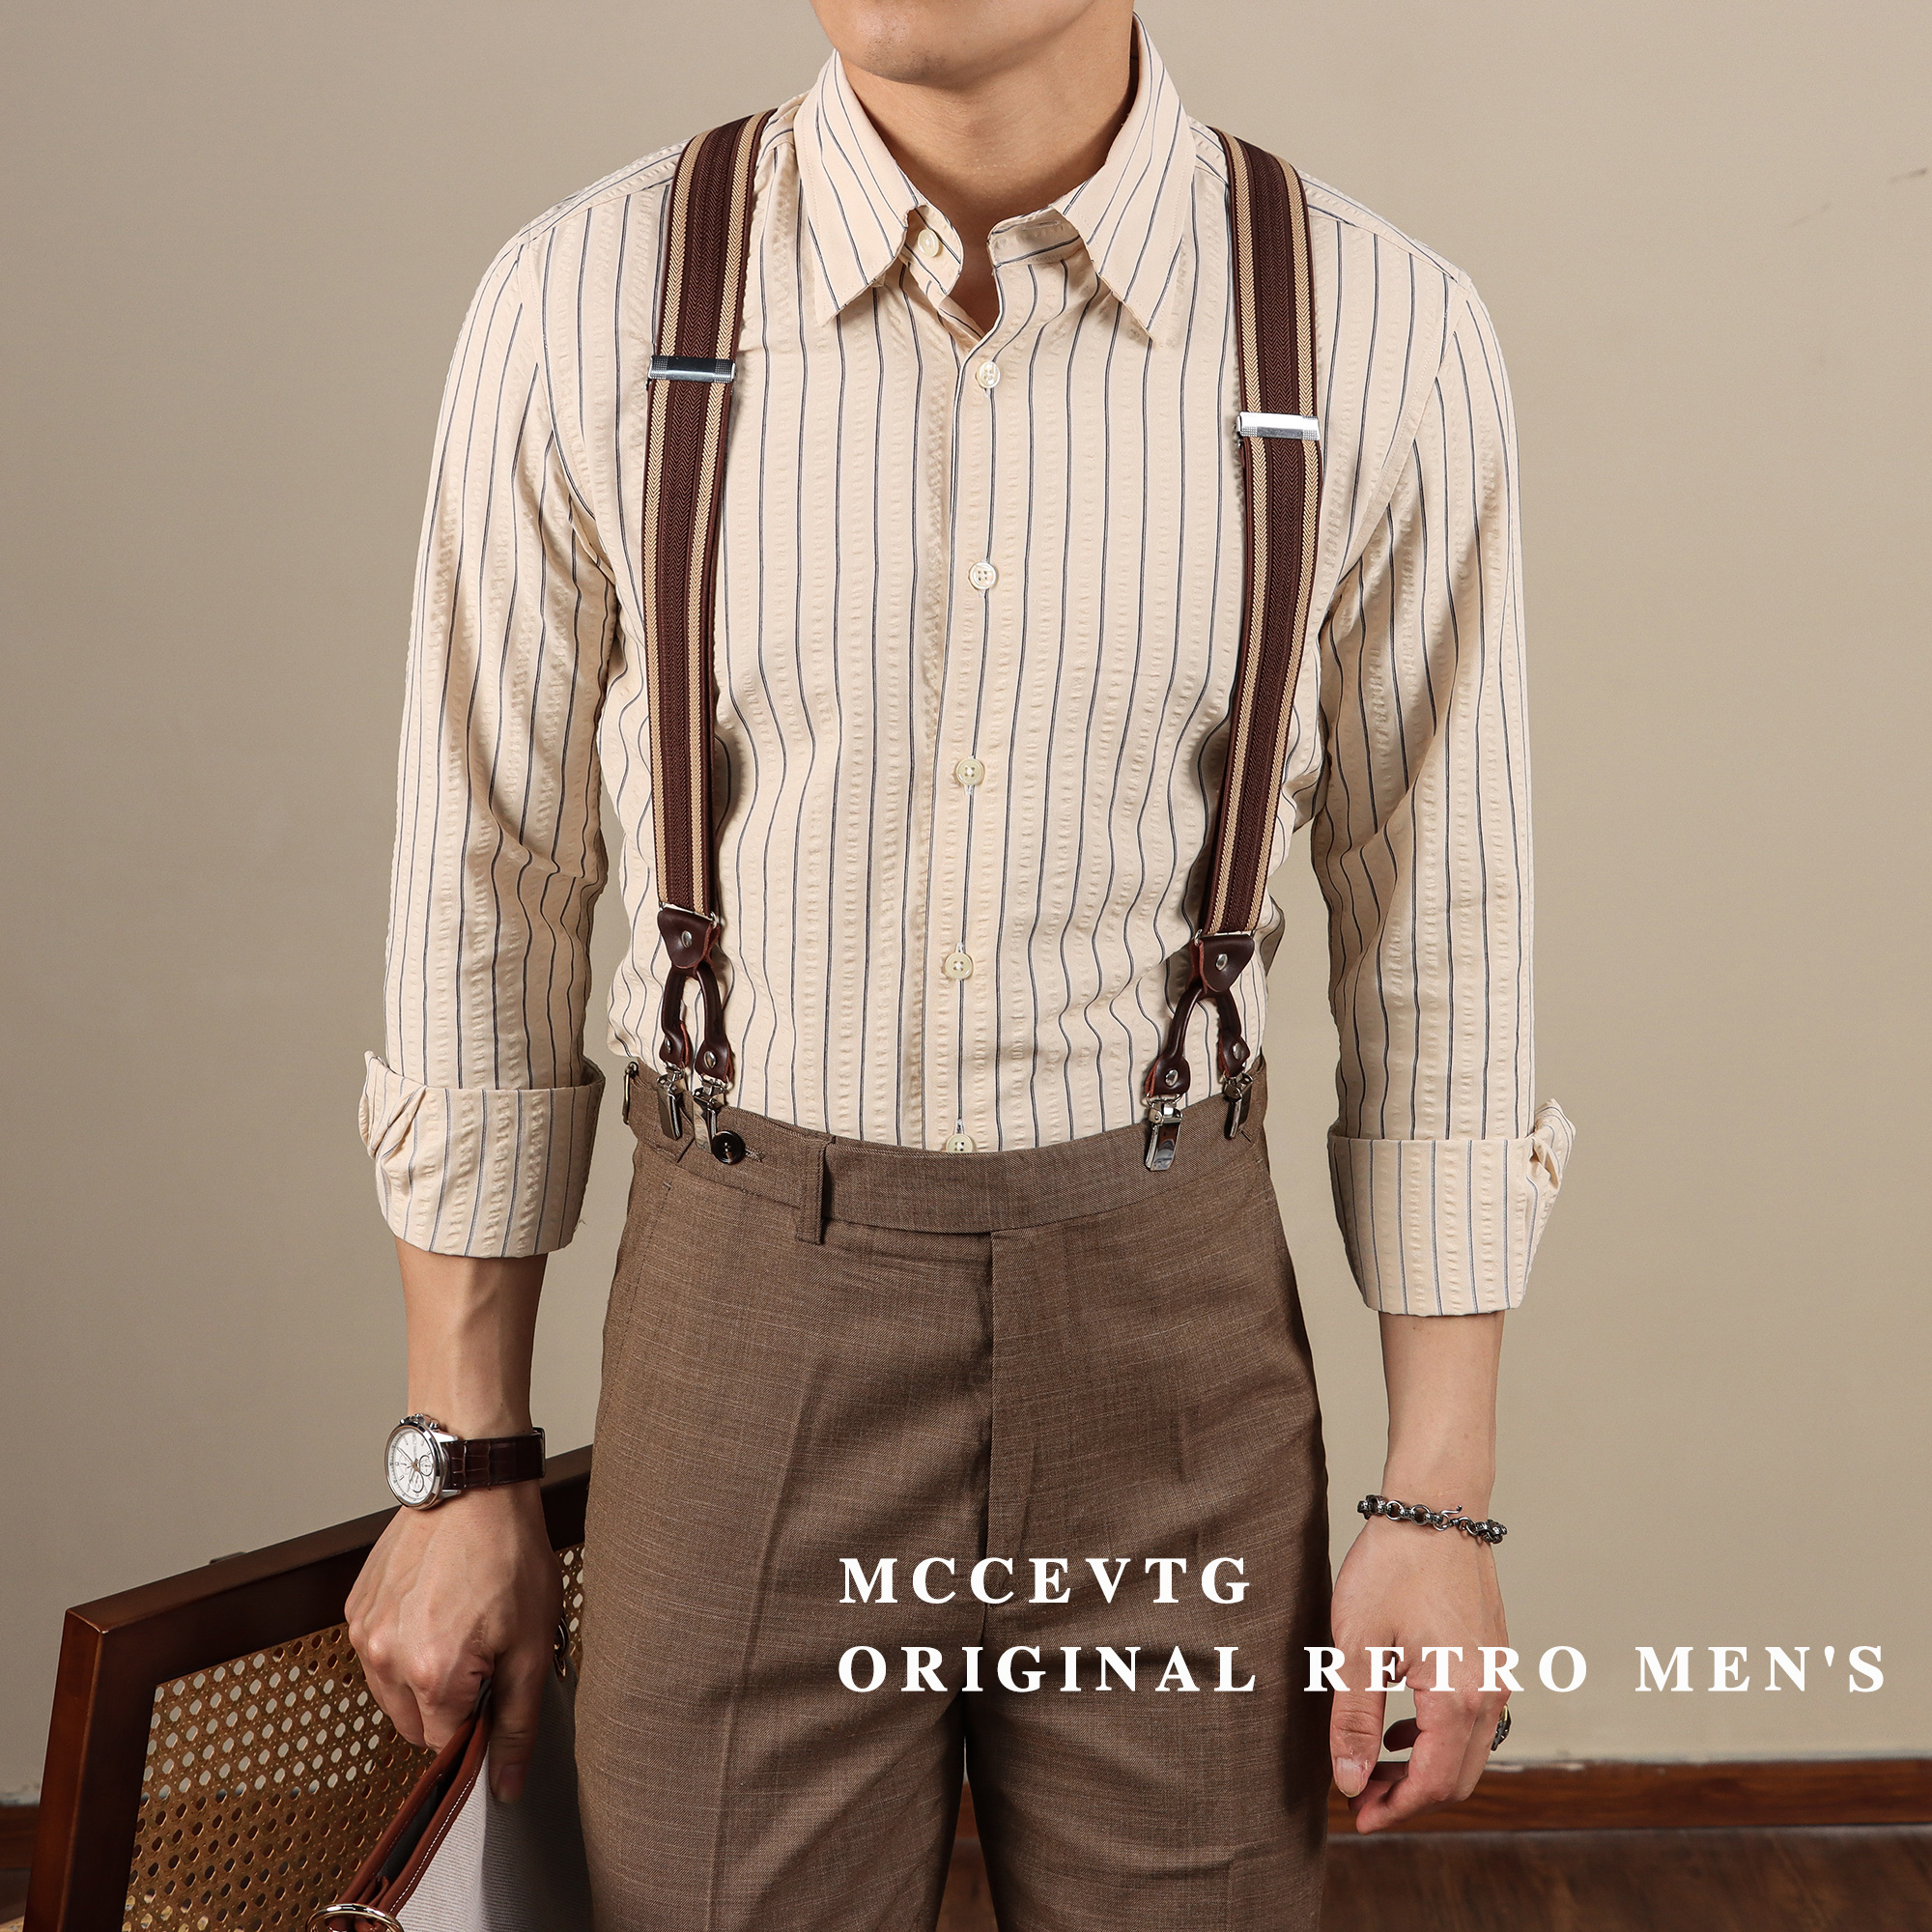 NEW Gentleman Retro Suspenders Trousers Sling Elastic Suspender For Men  Pants Button Type Strap Skirt Vintage Suspender From Fashionable16, $22.54